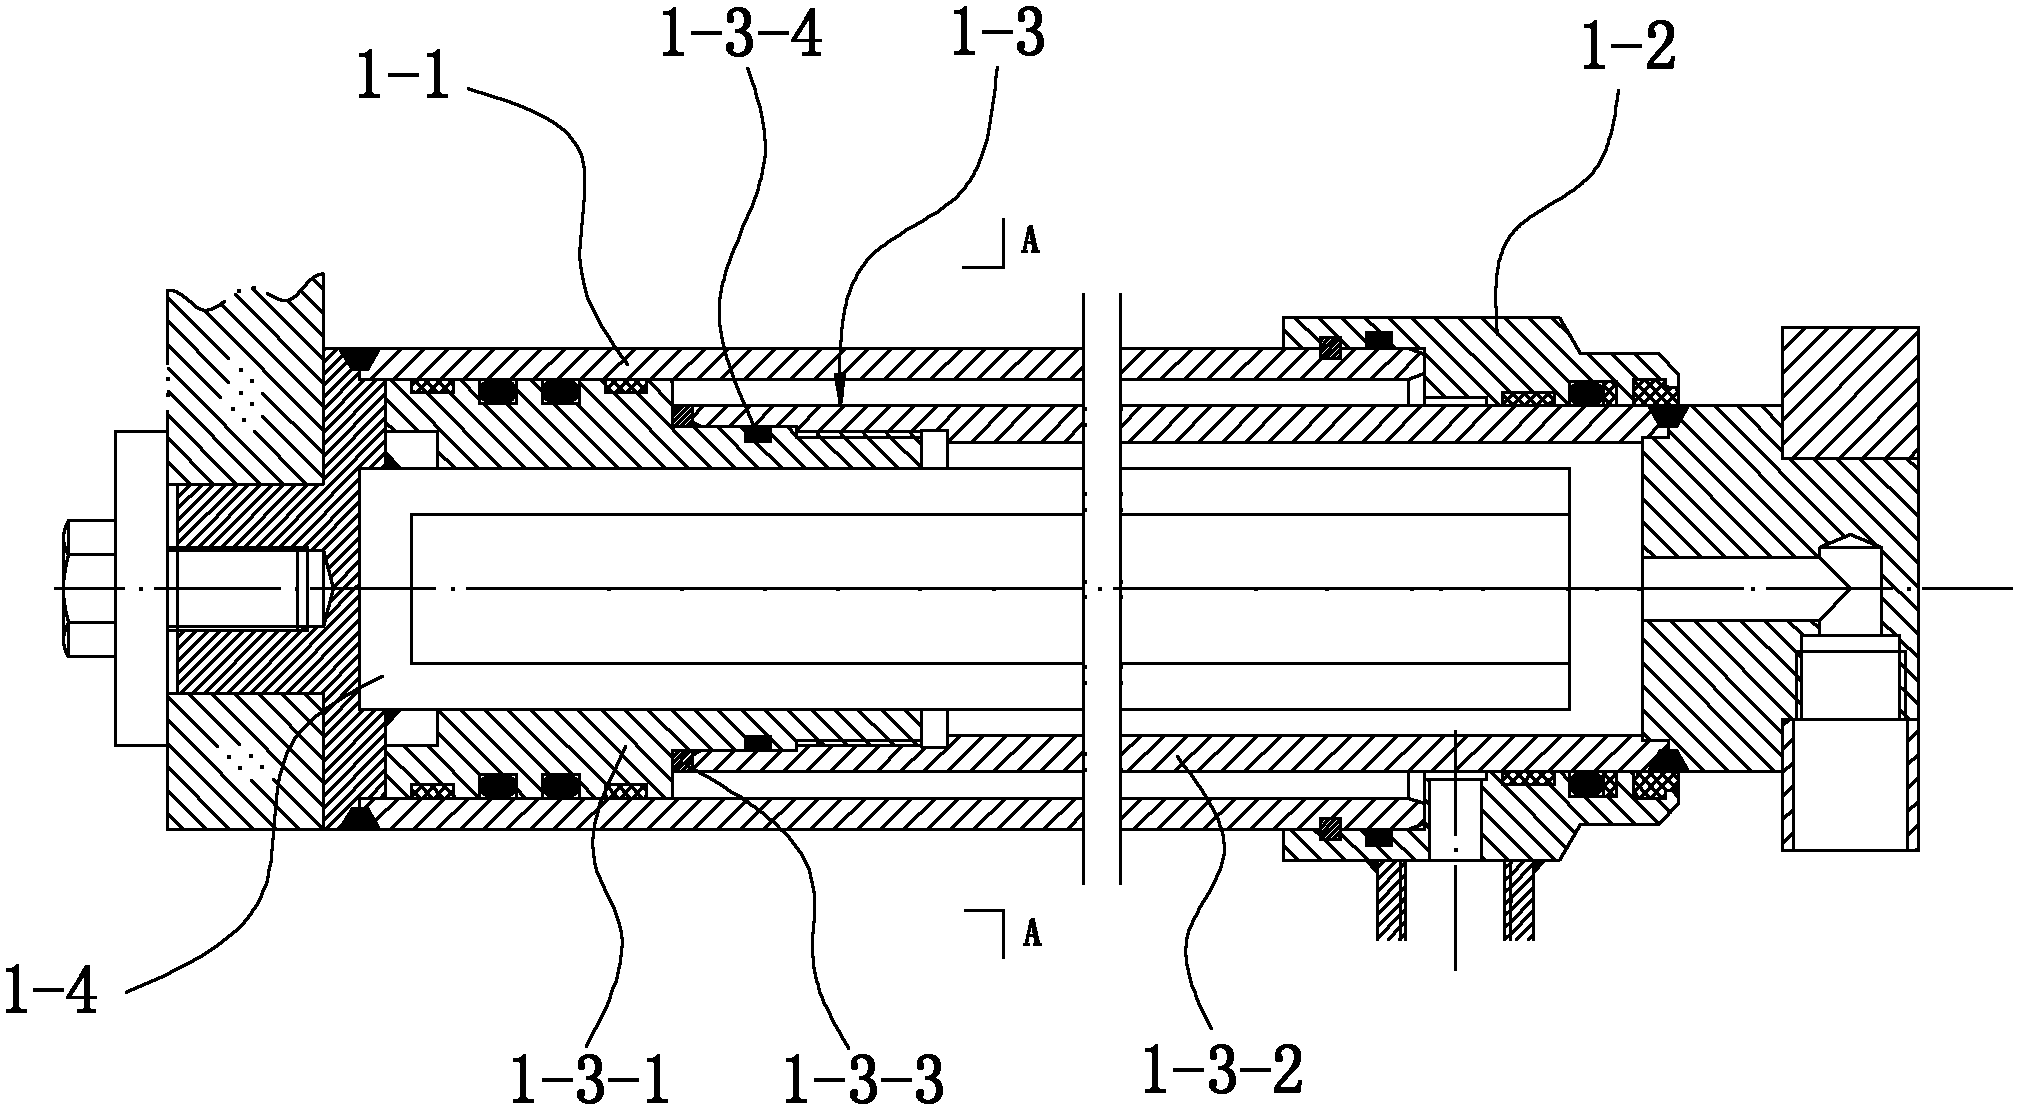 Internal-transmission torque hydraulic cylinder and water-detecting gas-detecting onboard jumbolter